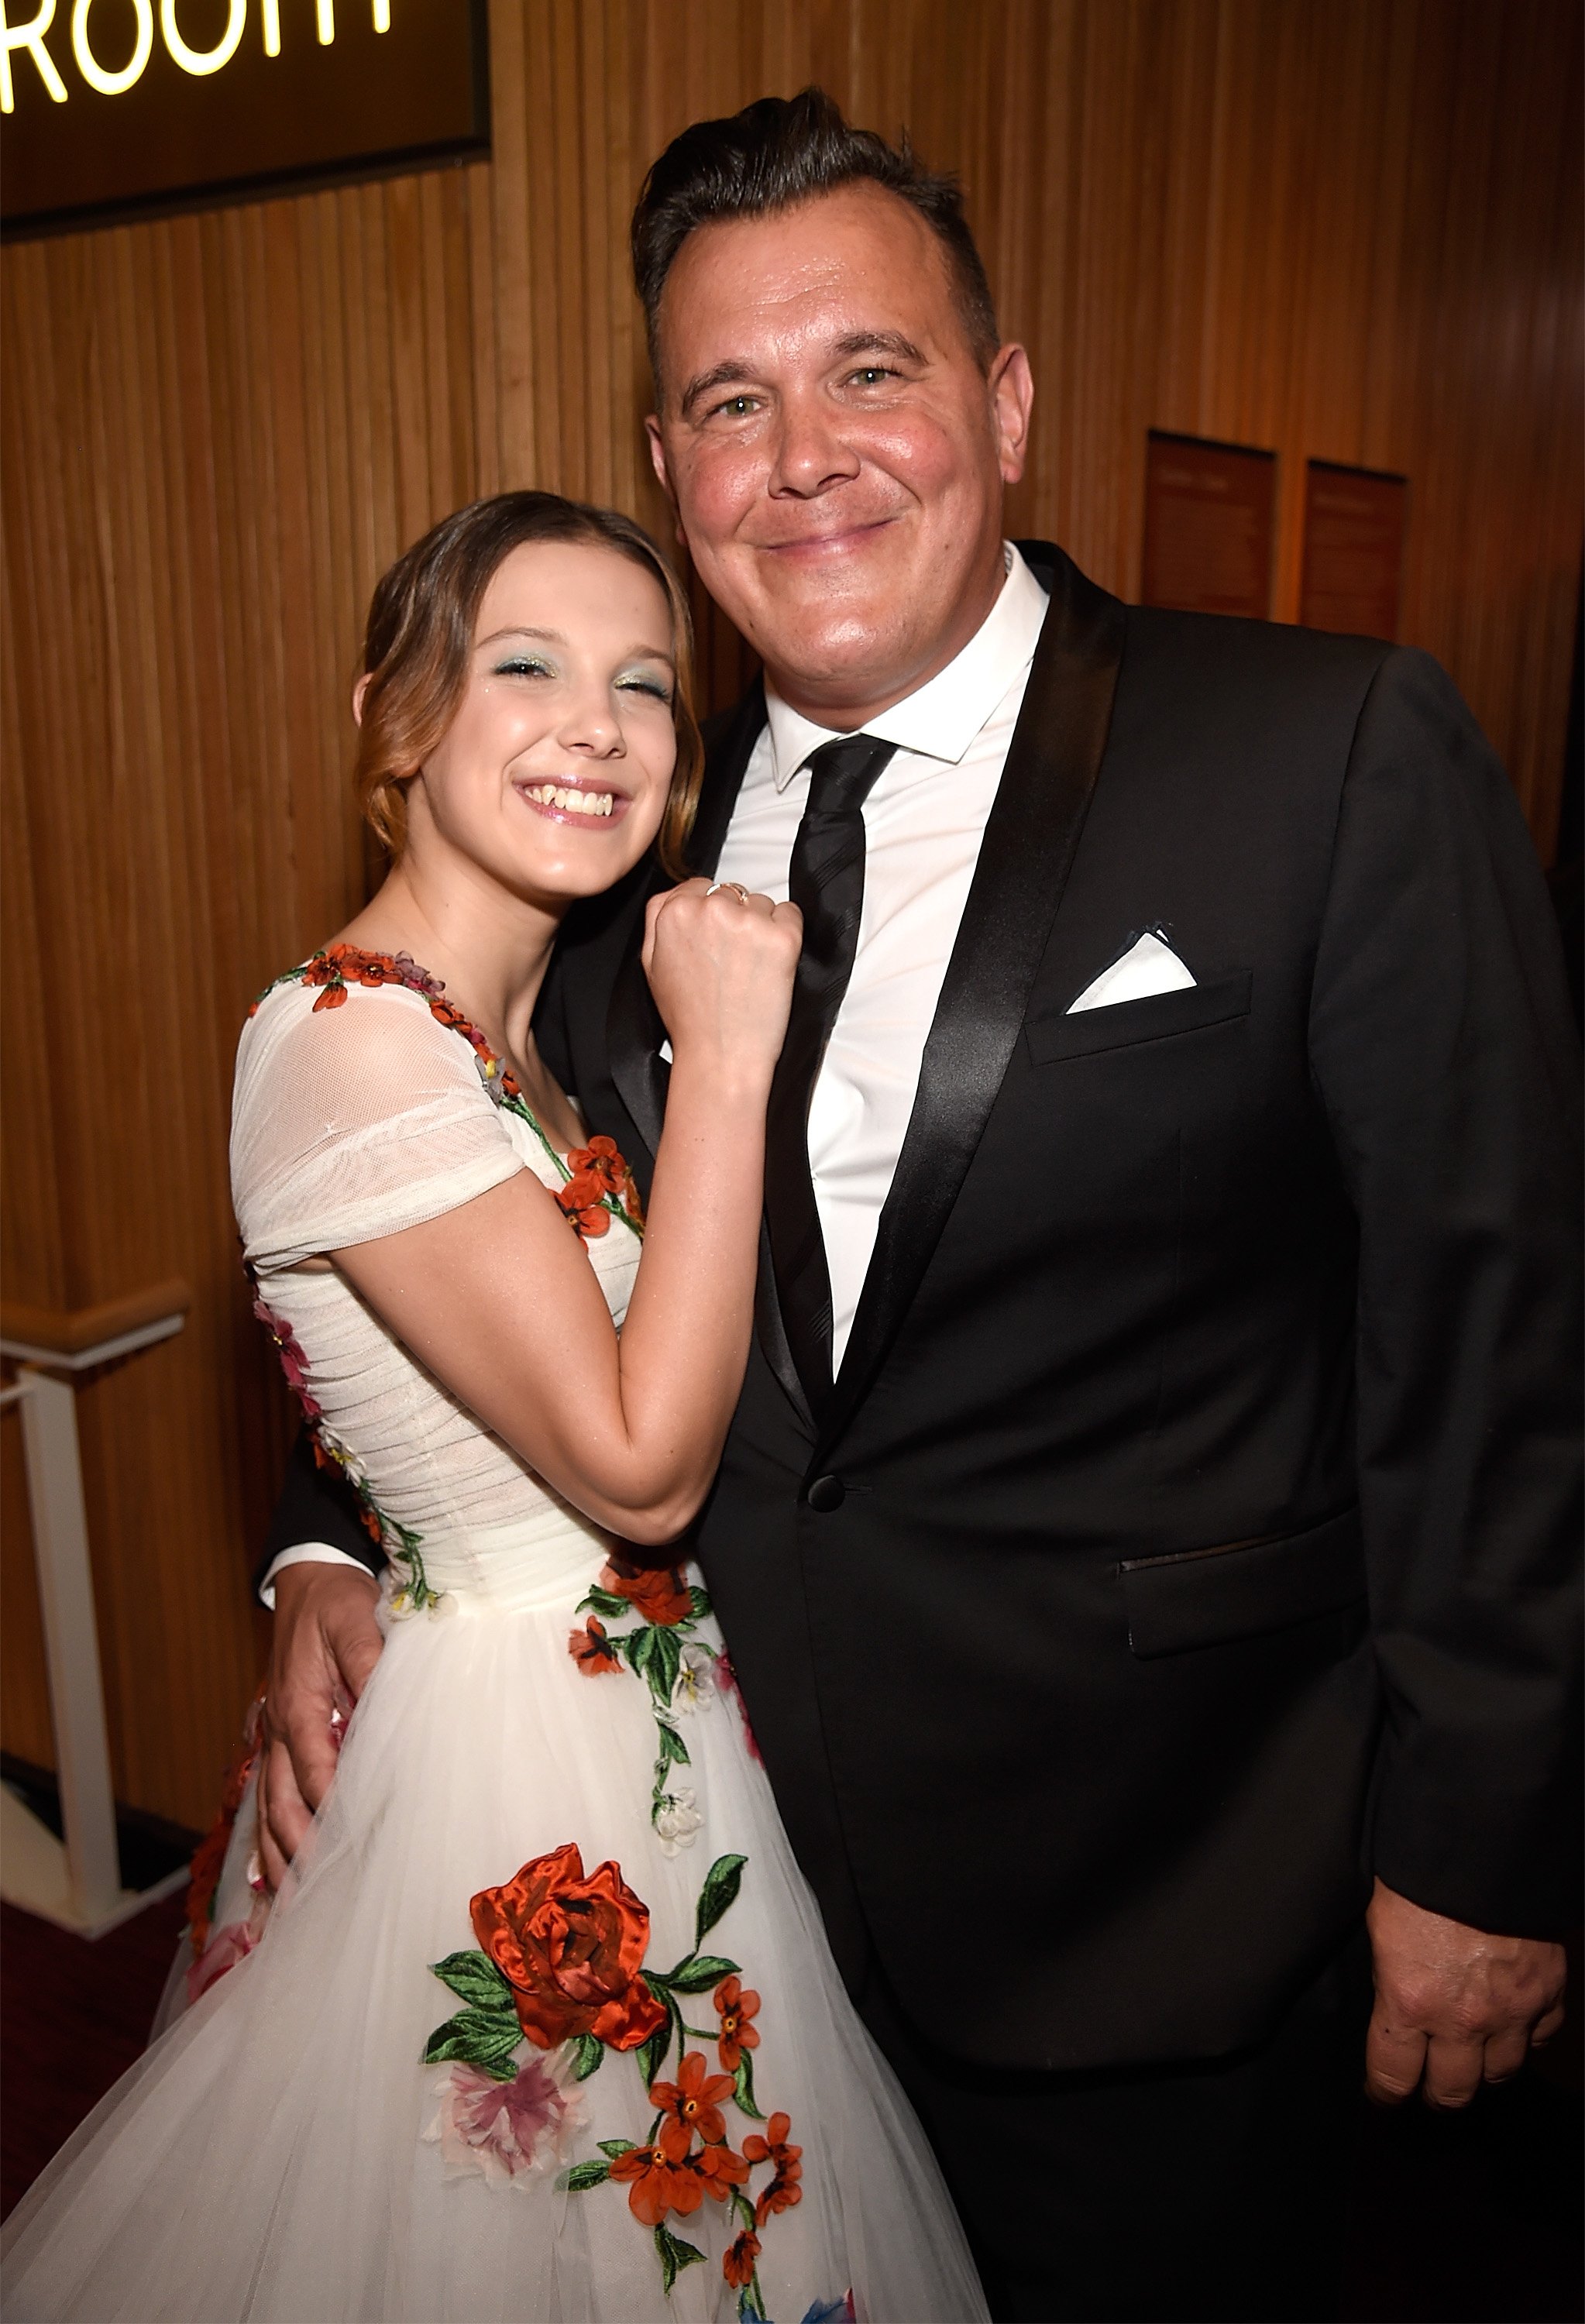 Millie Bobby Brown and Robert Brown attend the 2018 Time 100 Gala at Jazz, at Lincoln Center, on April 24, 2018 in New York City. | Source: Getty Images